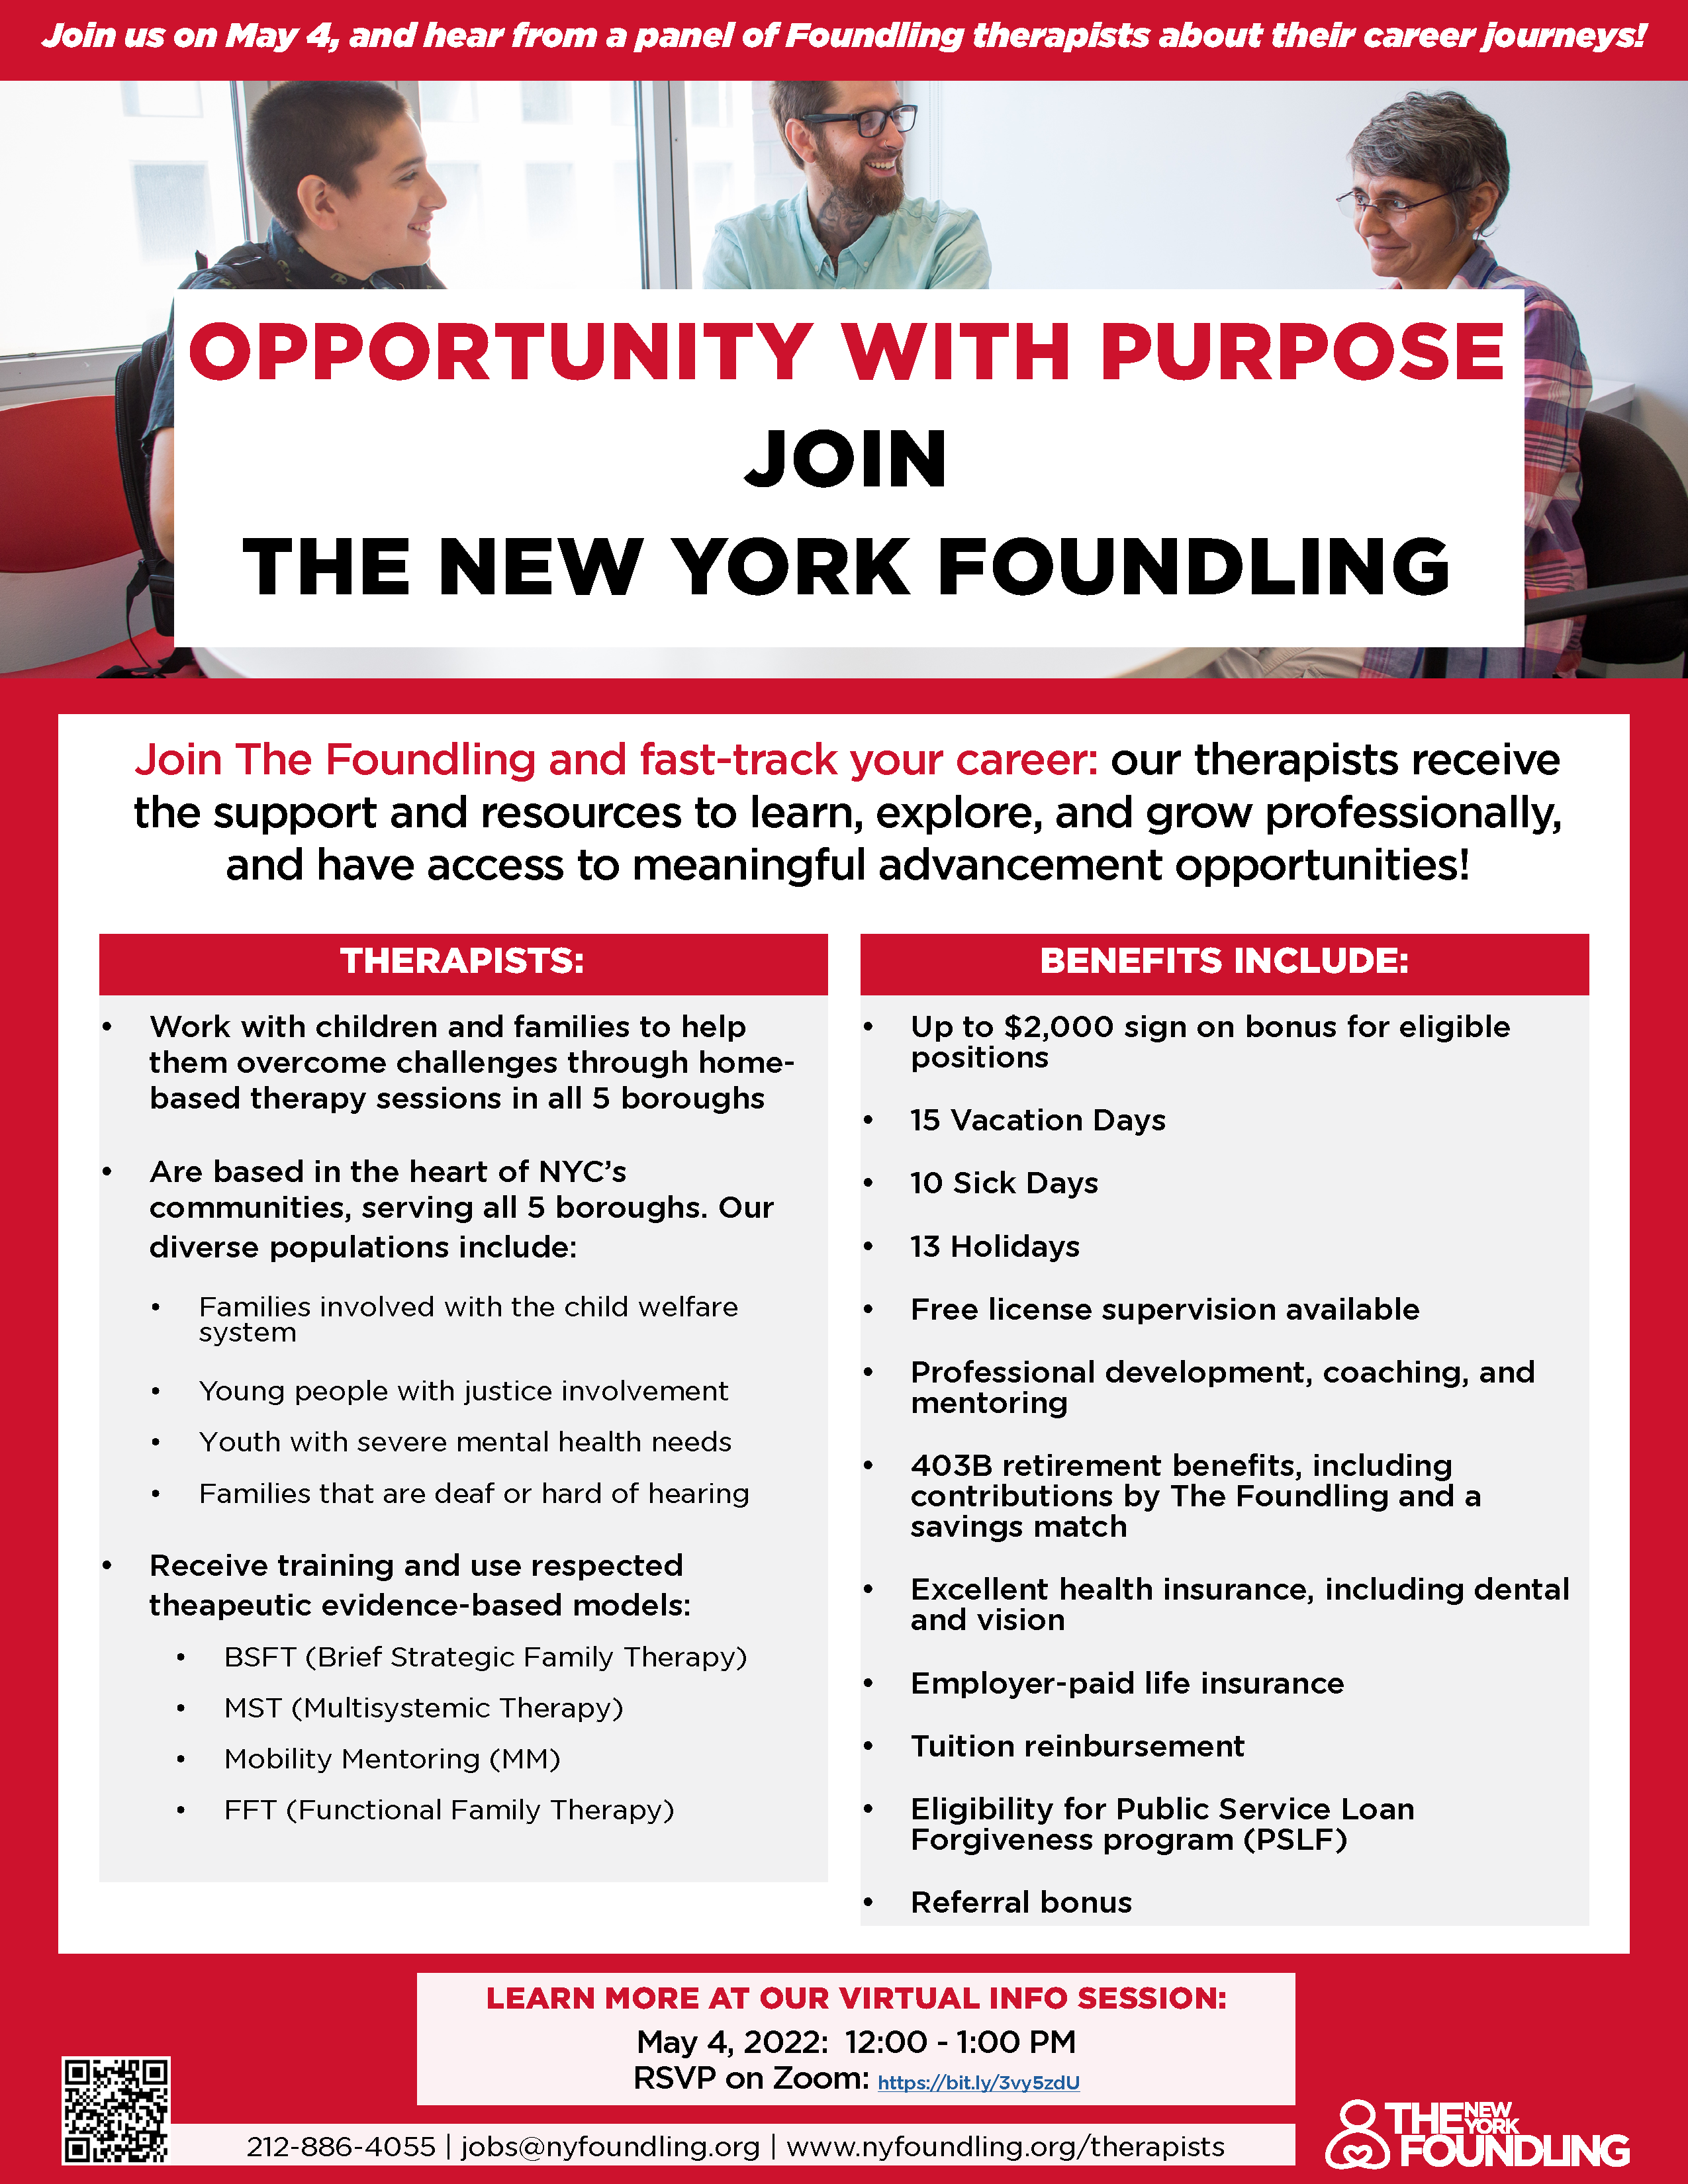 Details regarding therapist careers at NY Foundling including benefits and professional development opportunities offered and registration link for upcoming info session on May 4, 2022 at 12pm